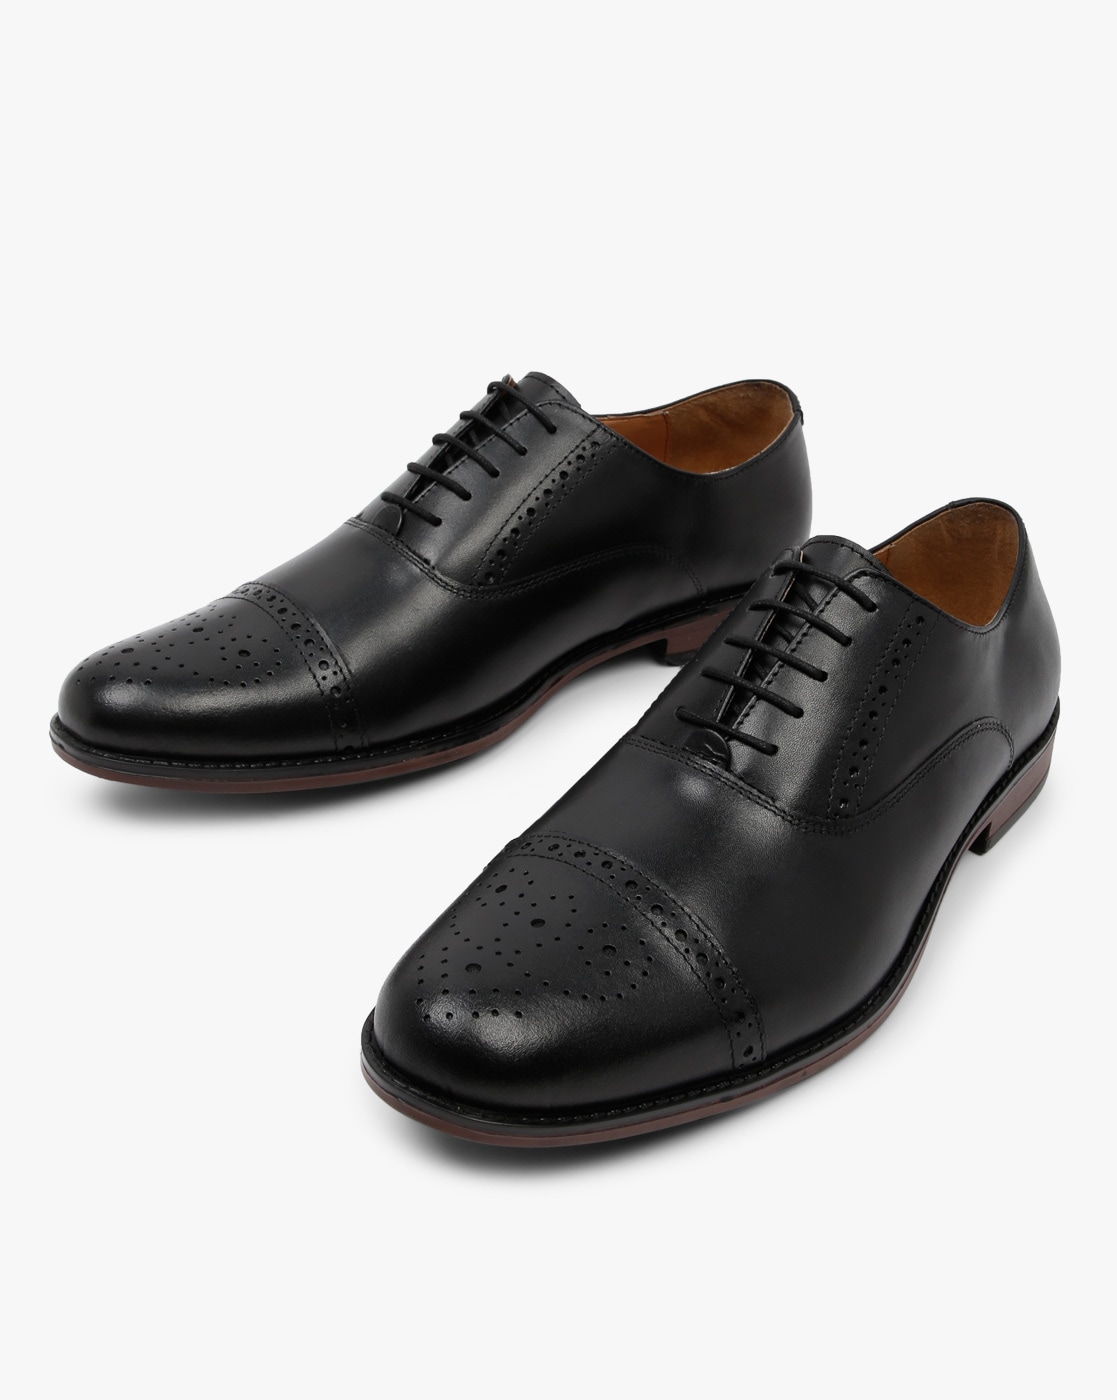 black leather oxford shoes